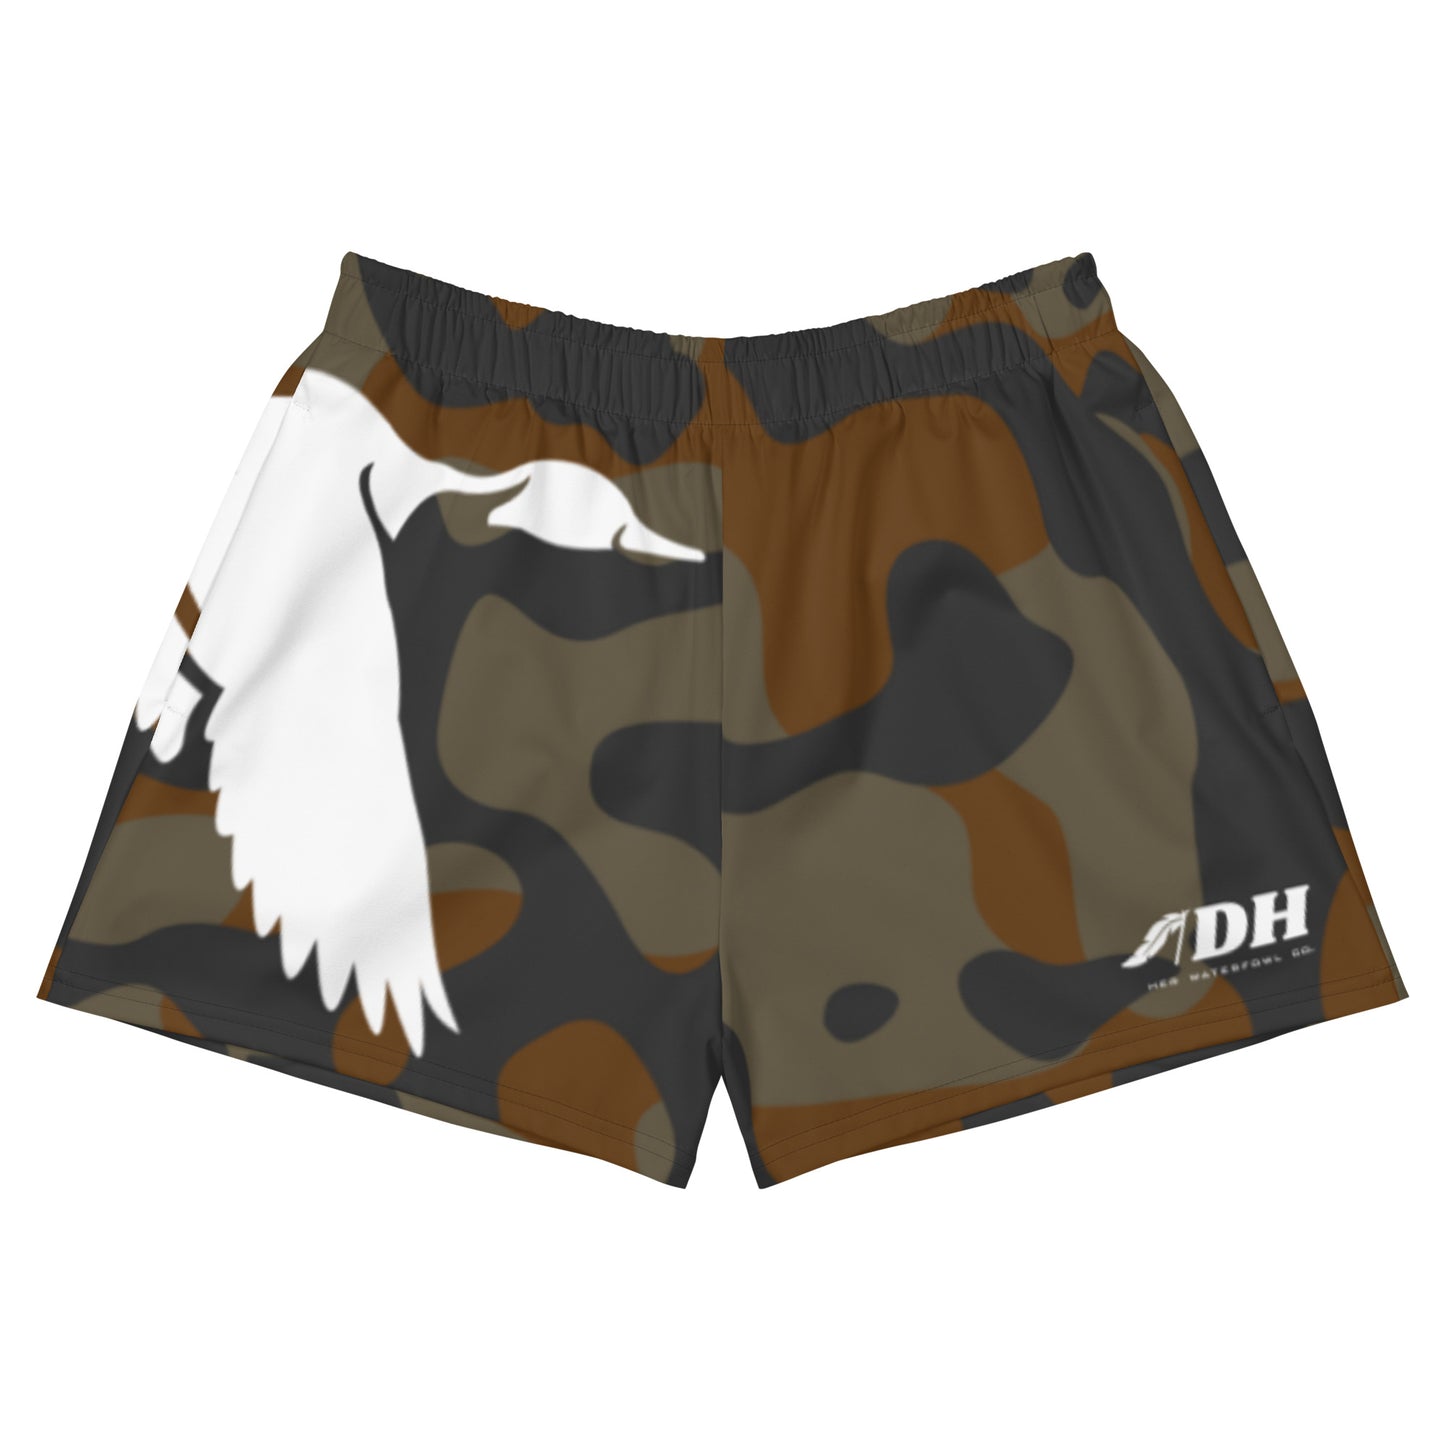 DH Pintail Athletic Shorts in Timber